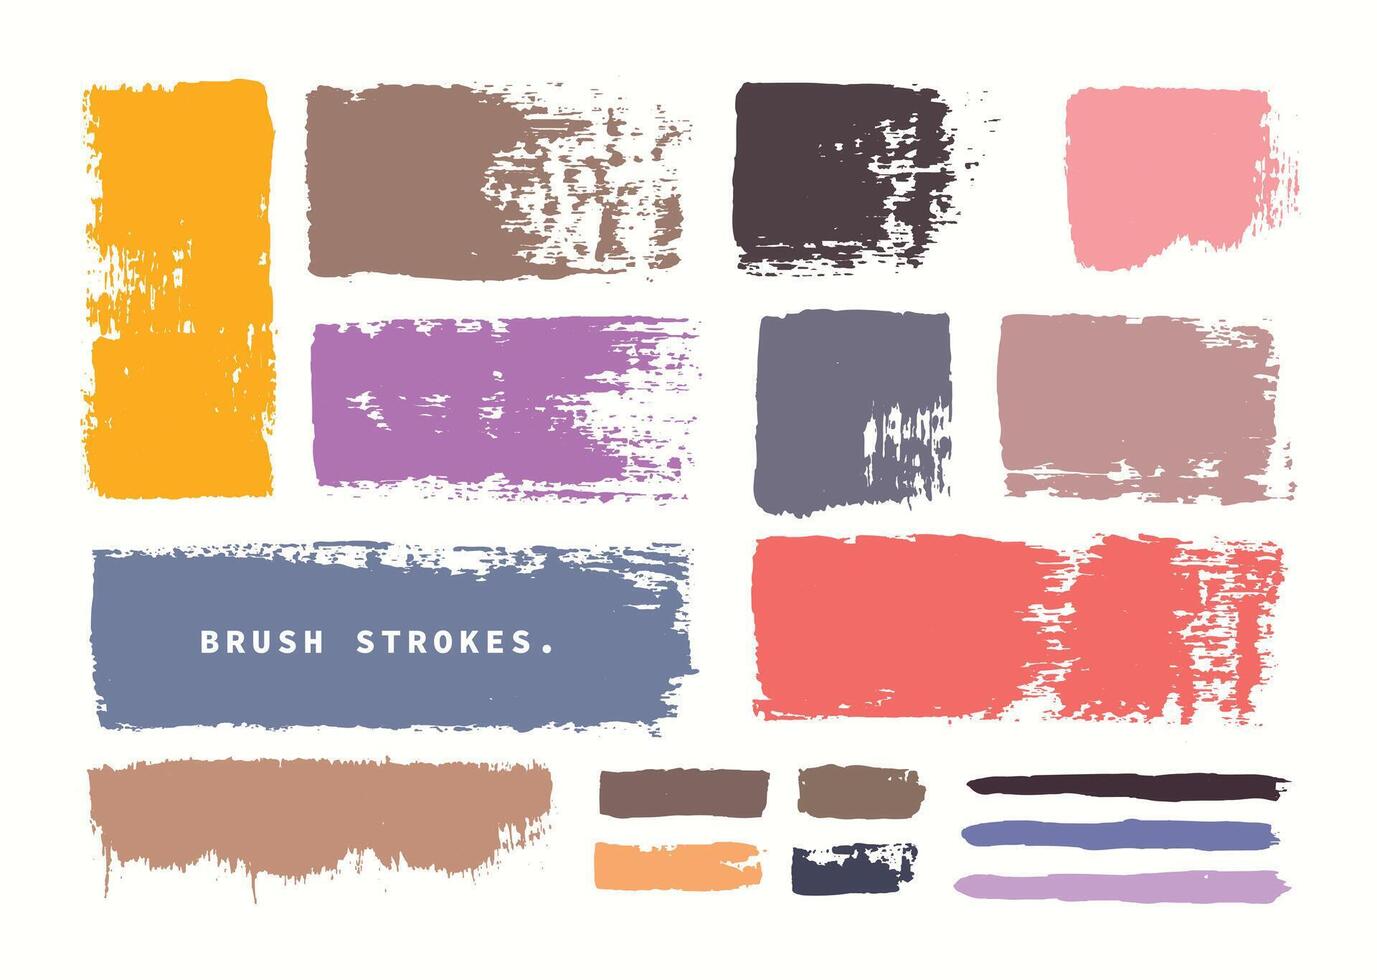 Colorful brush strokes texture element set. Abstract rough brushes design bundle. For artistic illustration. vector